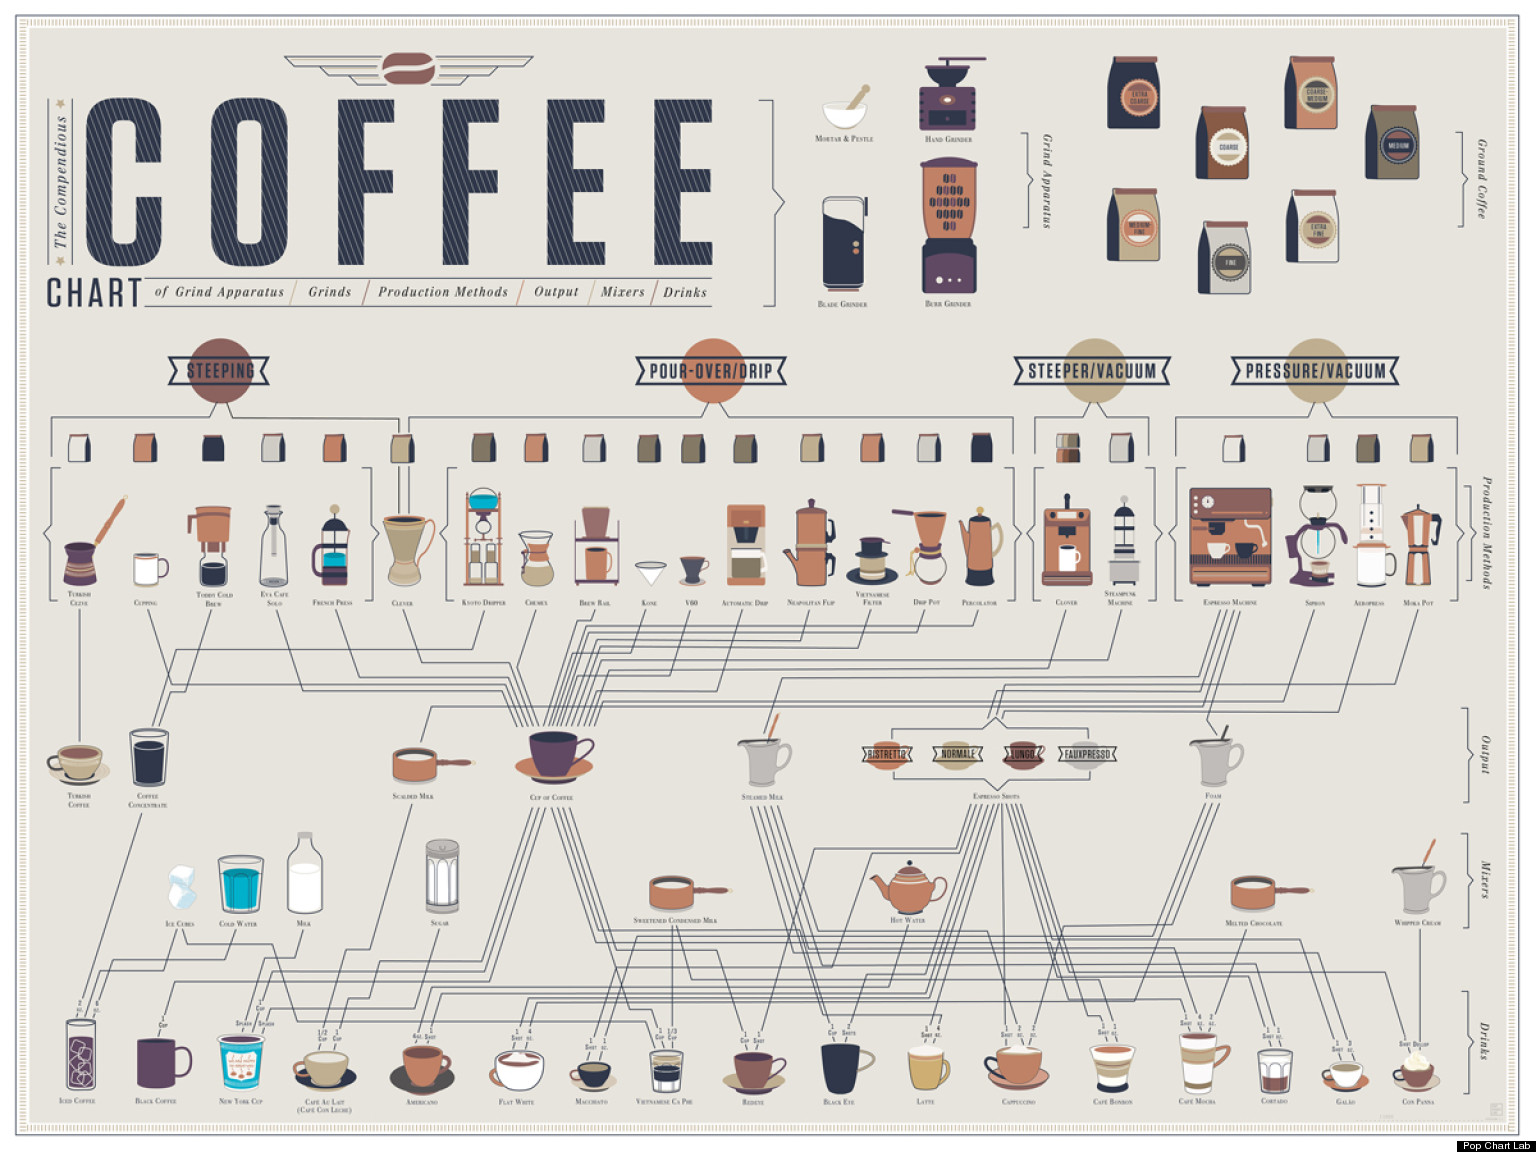 How To Make Different Types Of Coffee Chart